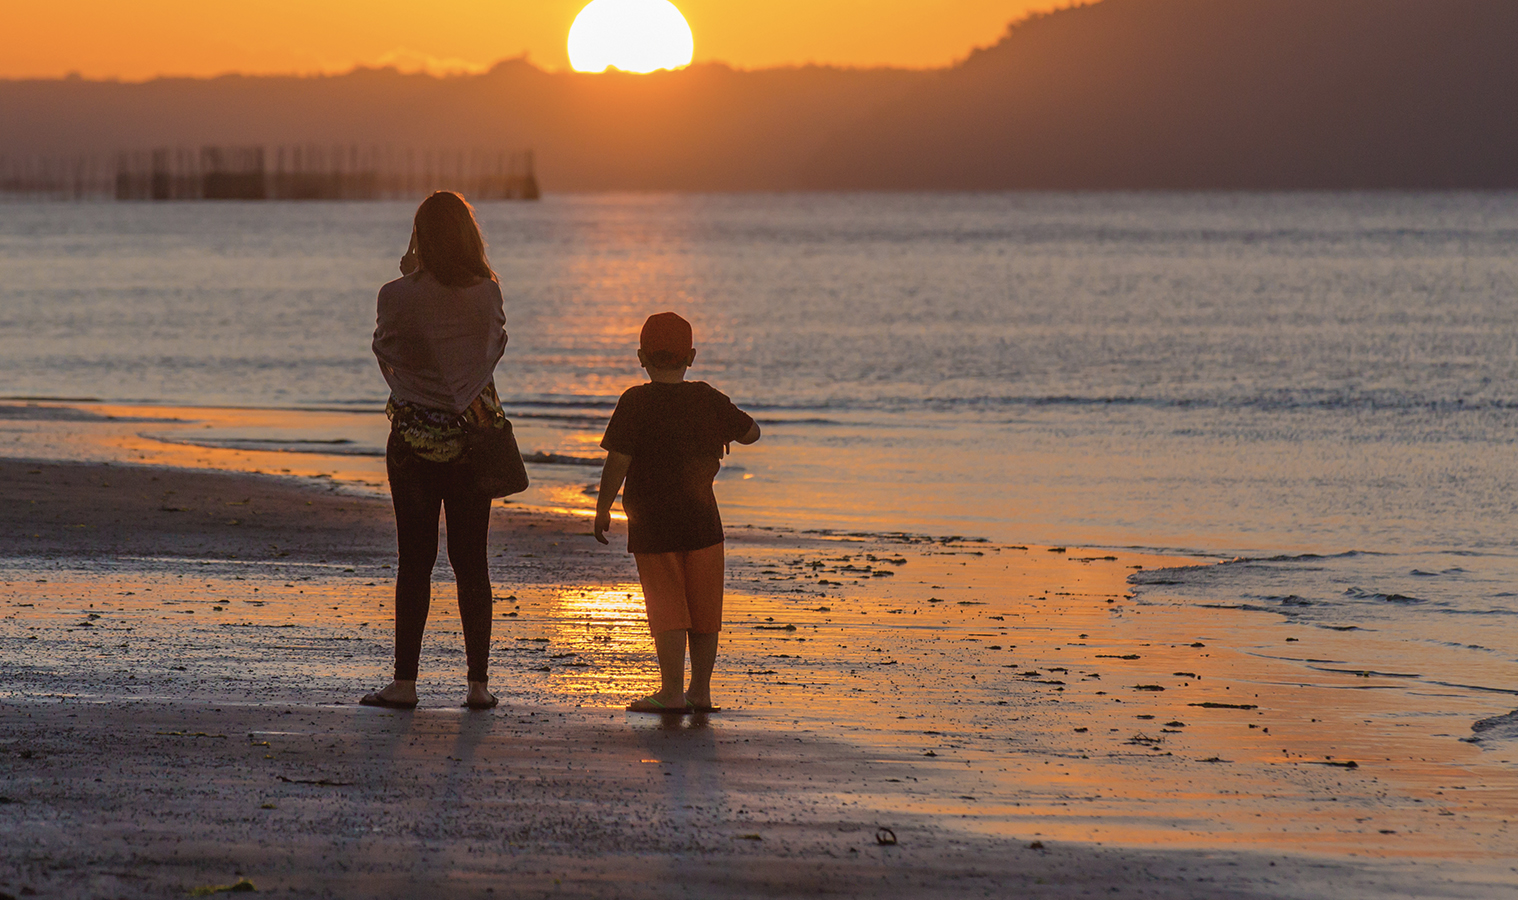 woman and a young boy at beach looking at a sunset